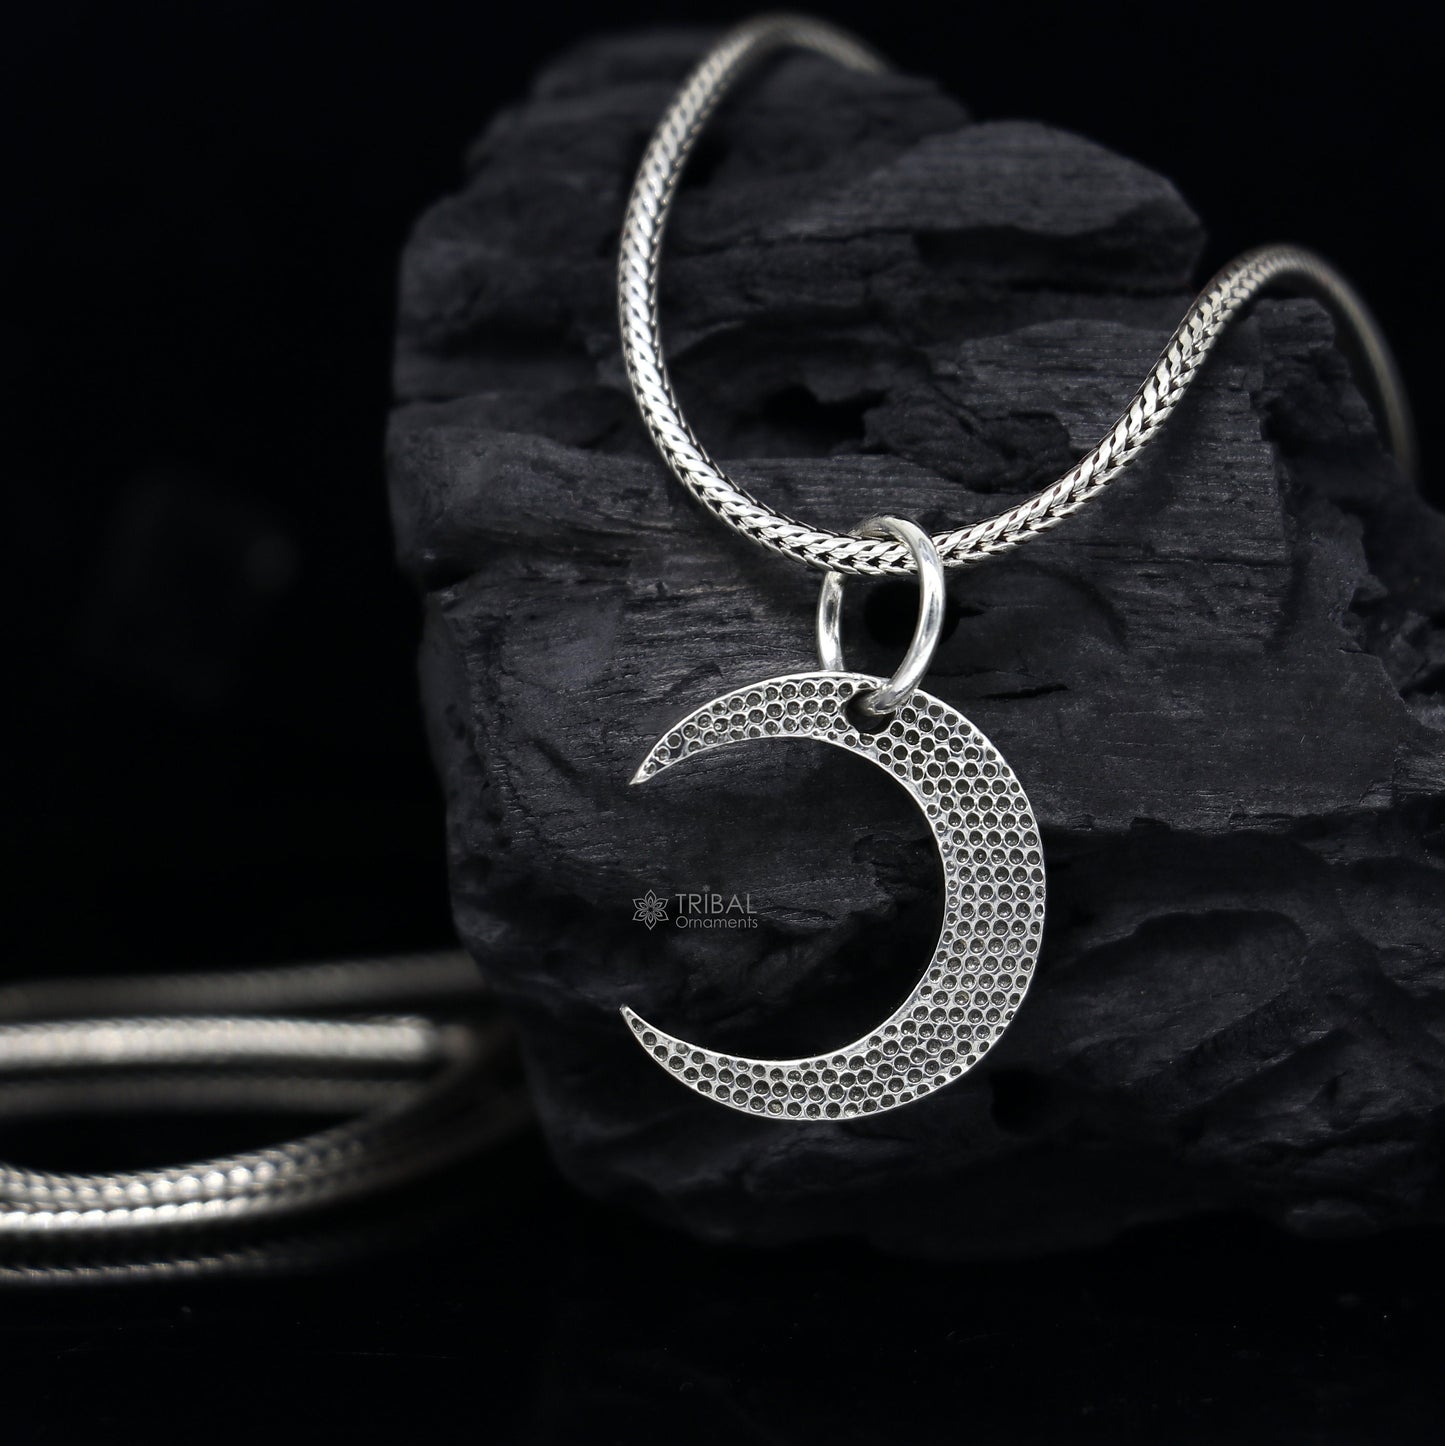 925 sterling silver unique half moon pendant amazing delicate silver jewelry for both men and women nsp651 - TRIBAL ORNAMENTS